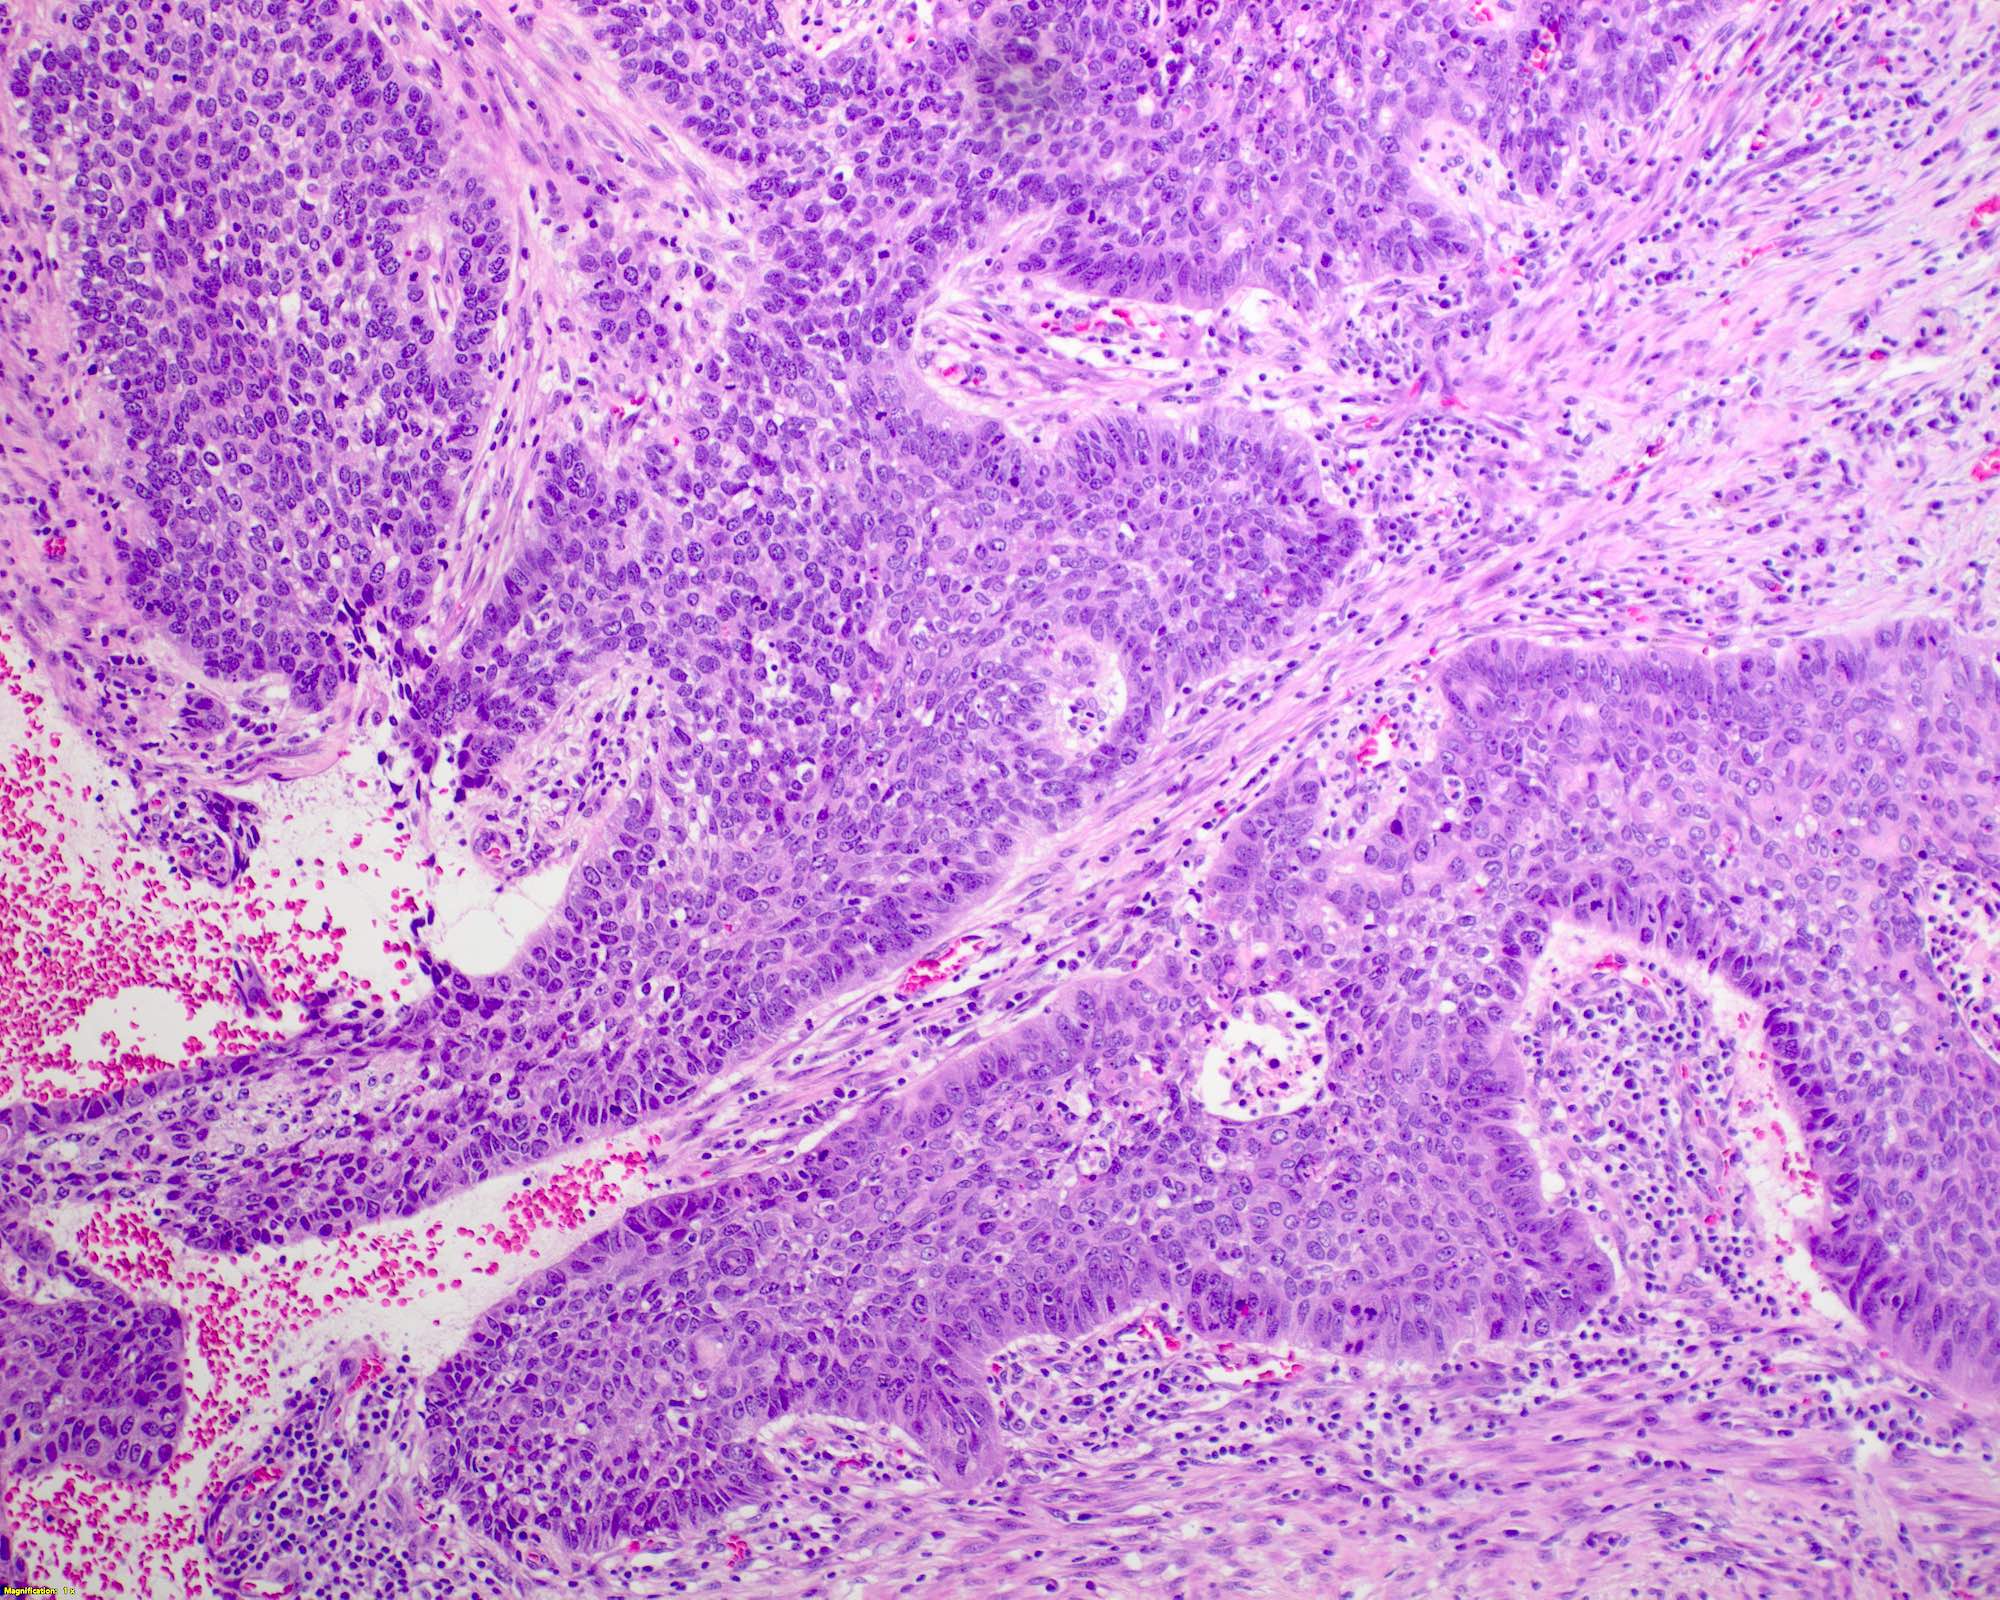 Palisading nuclei in basaloid type